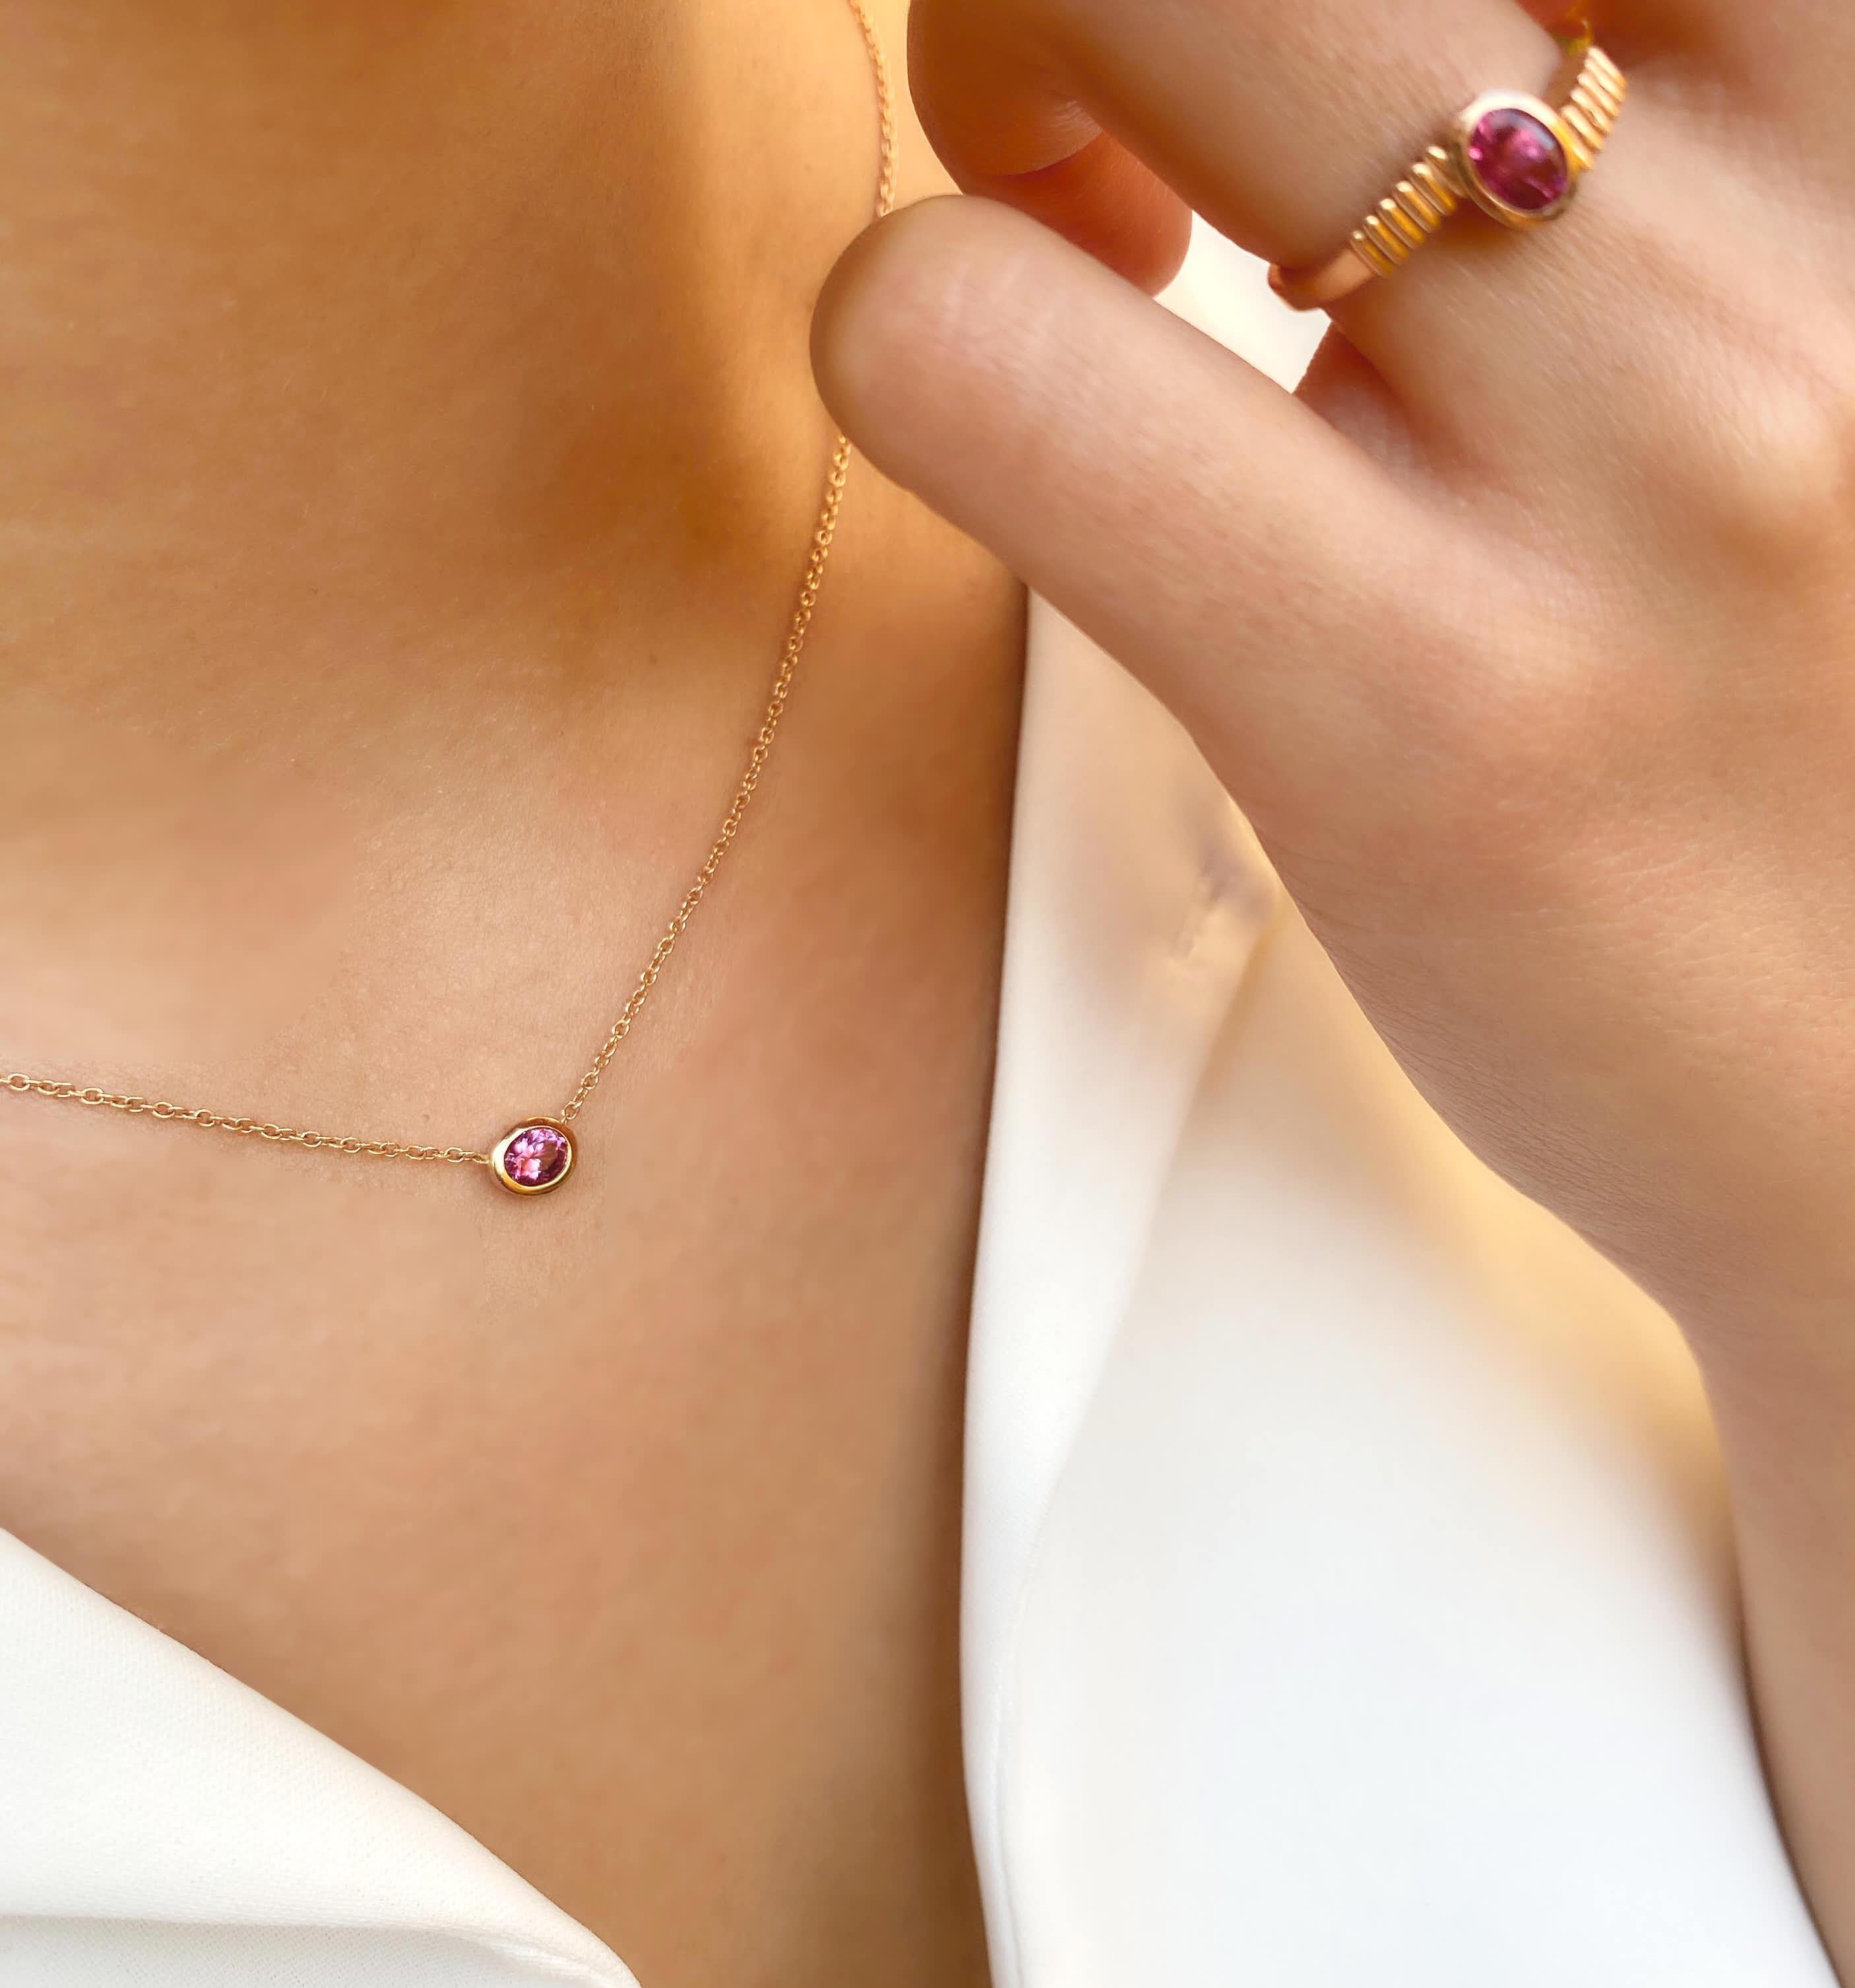 •	18 Karat Recycled Rose Gold 
•	42 cm chain with extension
•	Available color: Rose Gold
•	Pink sapphire 6×5 mm oval cut
•	Origin: Ceylon mine, Sri Lanka
•	Hand-made in Spain
•	Bespoke: Yellow, White and Rose Gold
•	Bespoke take 3-4 weeks to